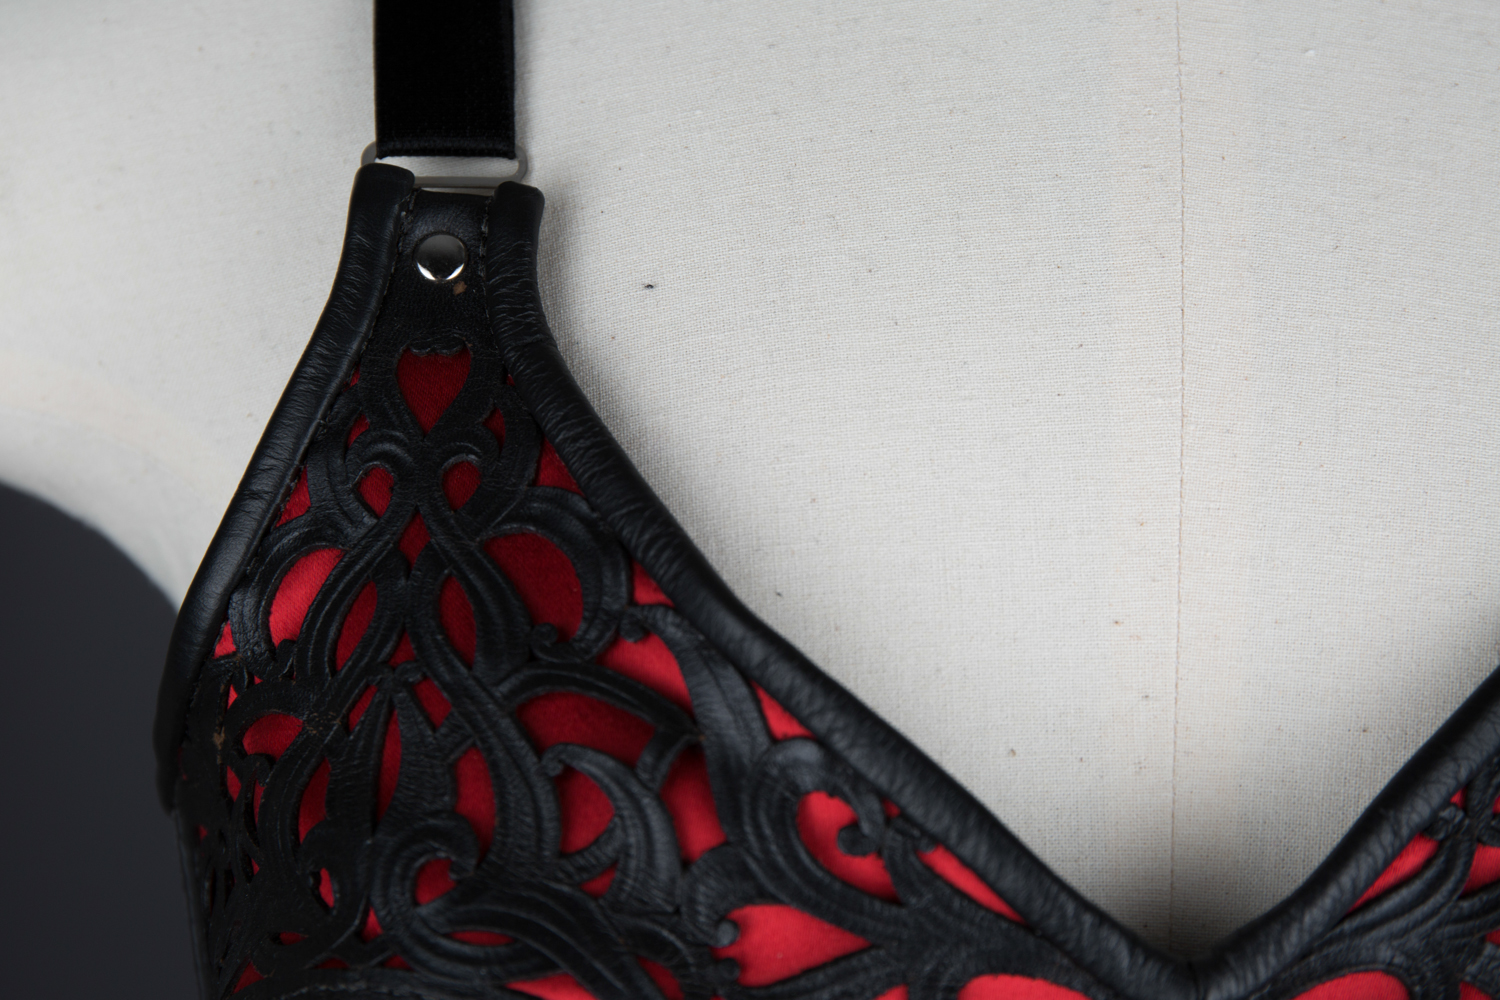 Full Cup Tooled Leather Bra by Cristiane Tano, 2012, Brazil. The Underpinnings Museum. Photography by Tigz Rice.